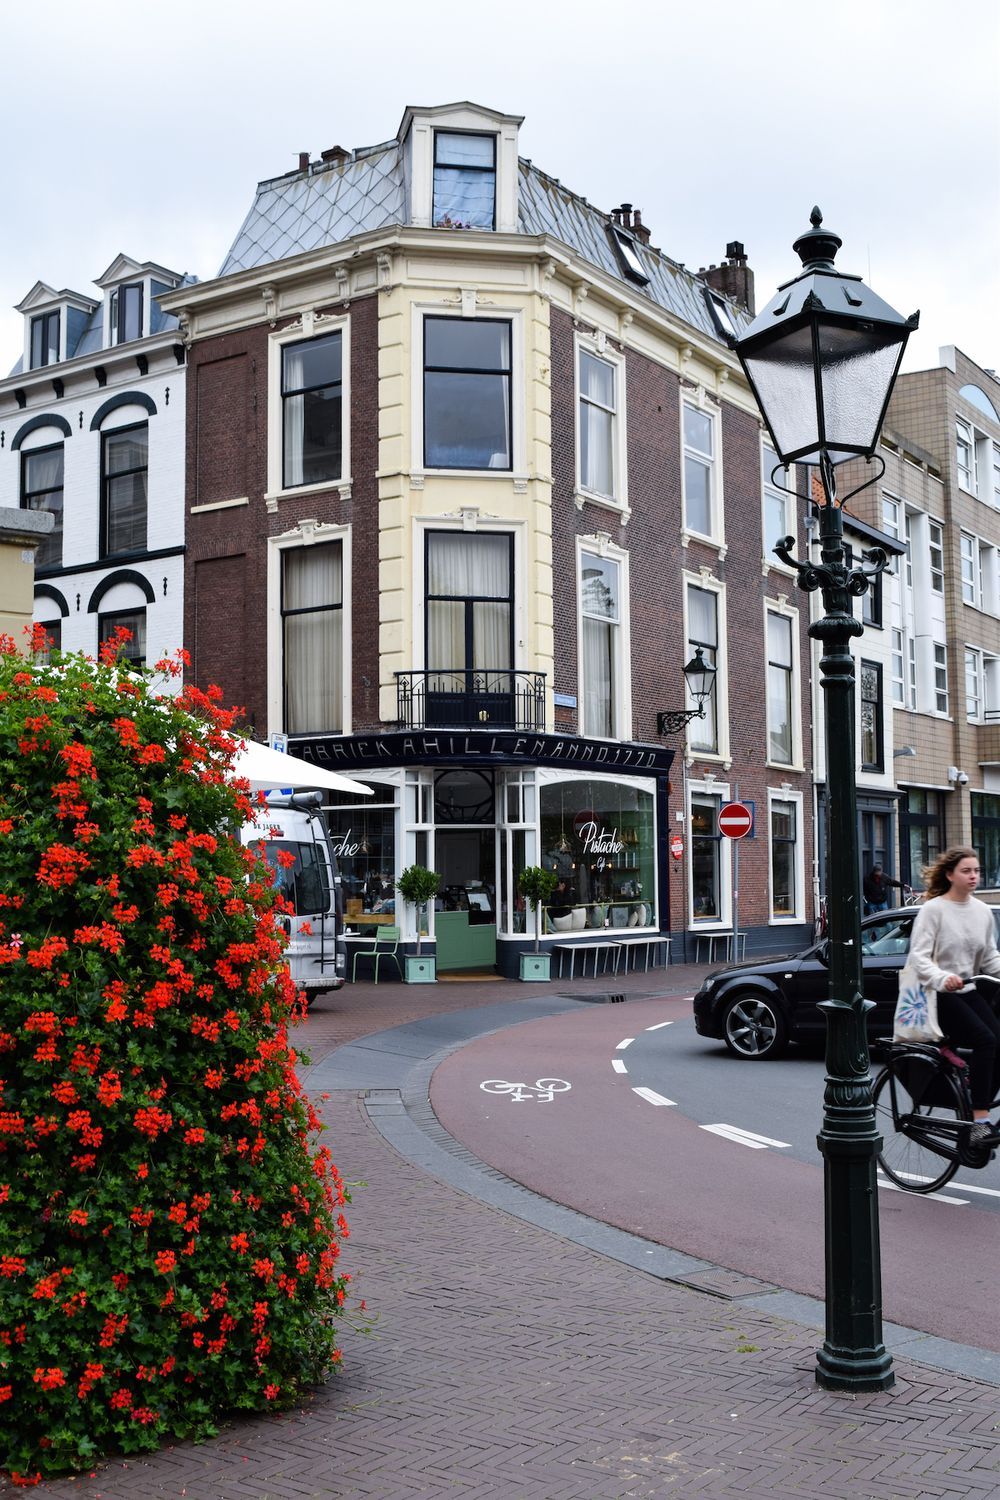 Exploring The Hague, The Netherlands